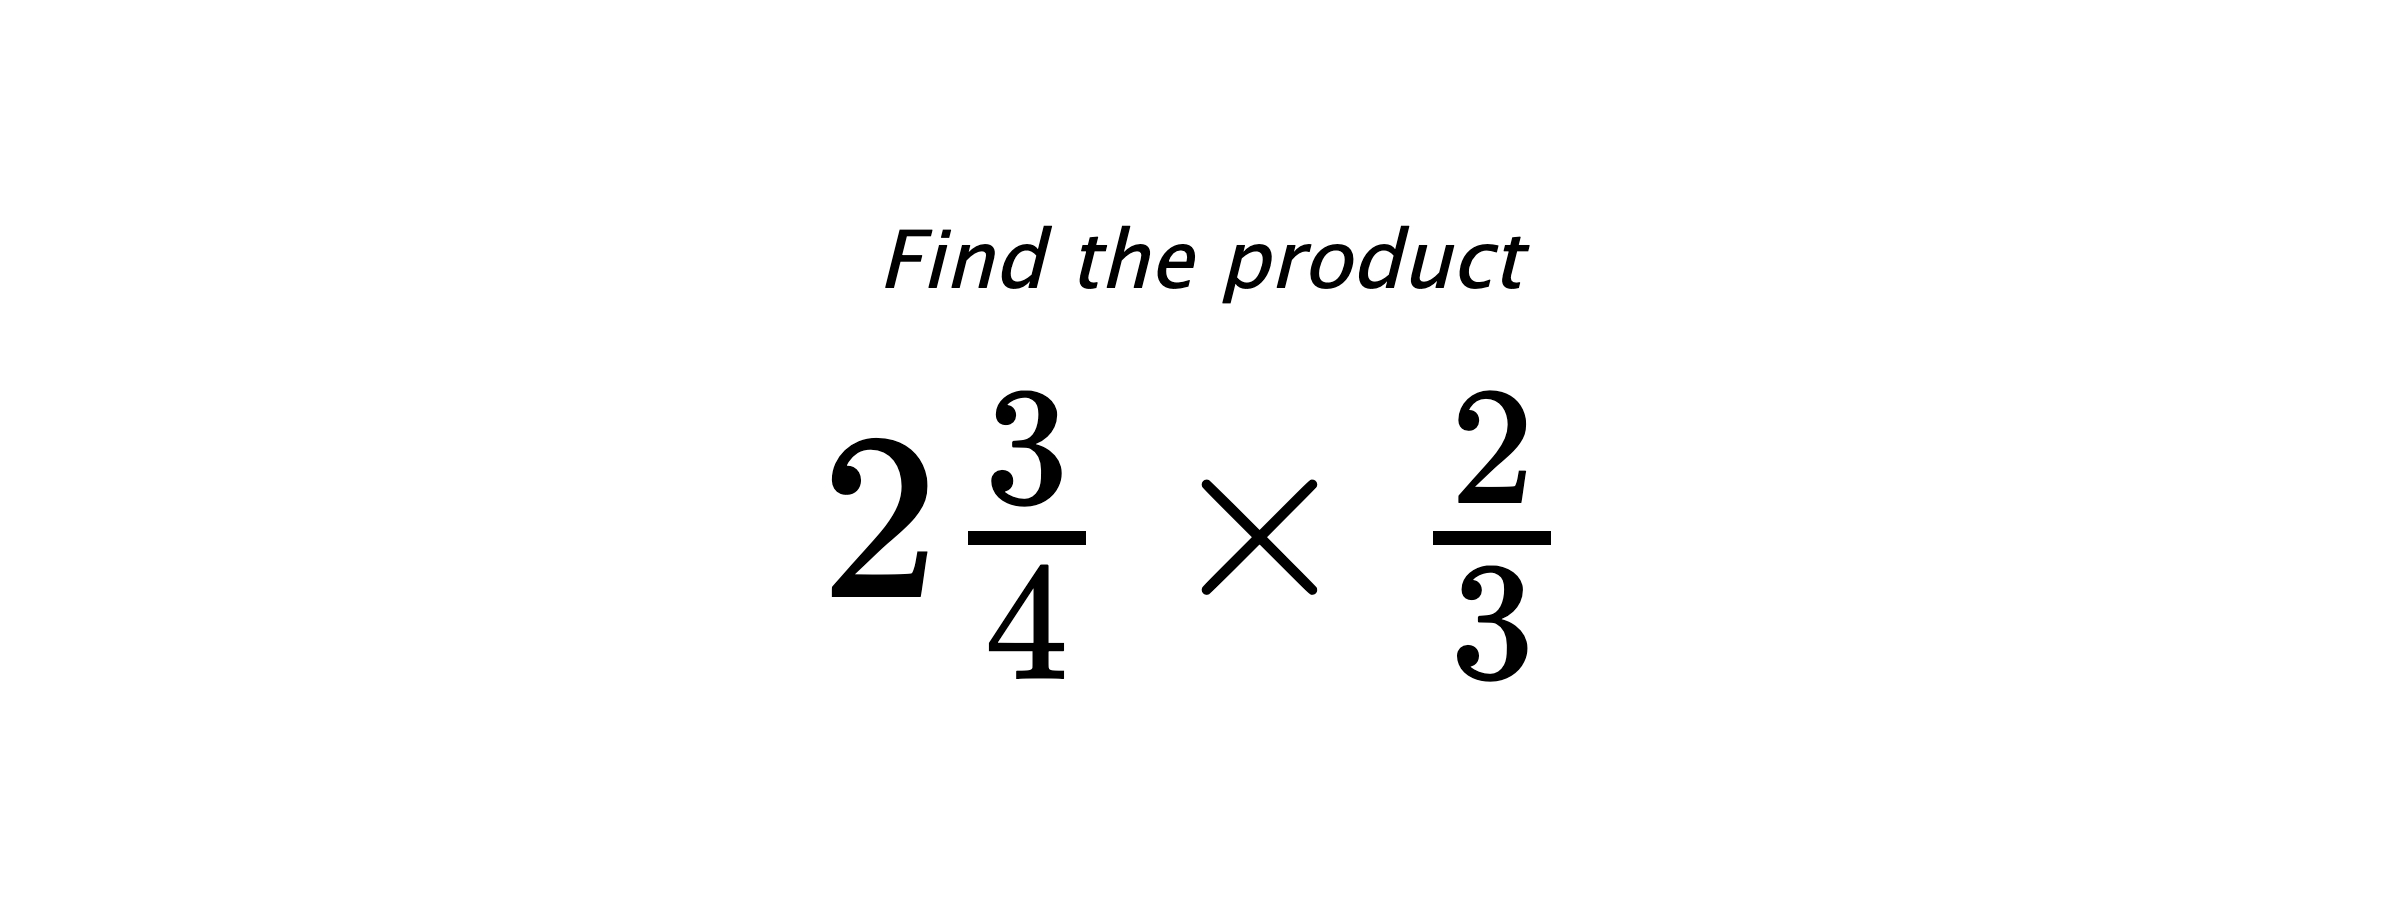 Find the product $ 2\frac{3}{4} \times \frac{2}{3} $